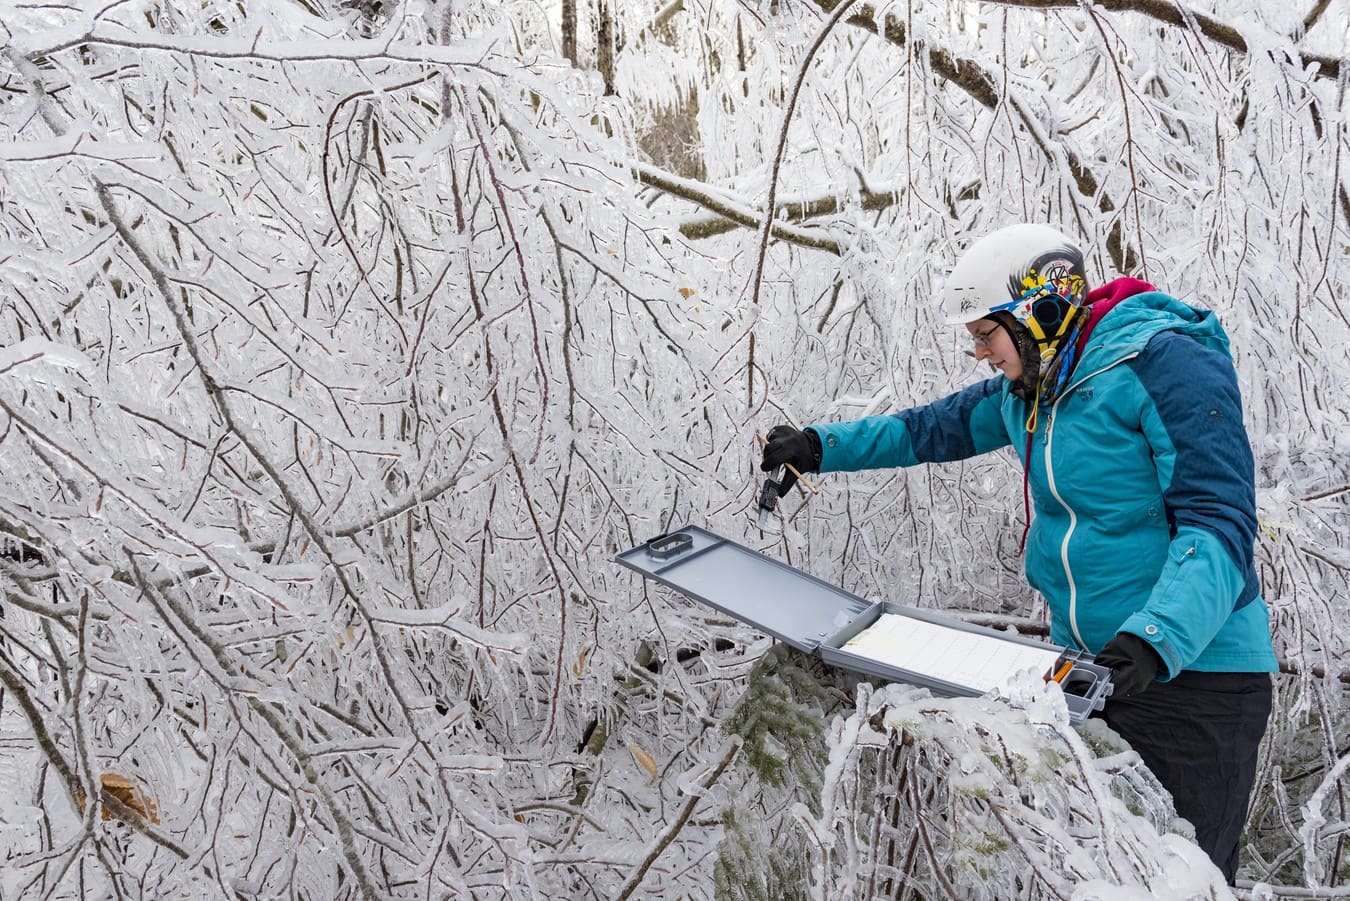 Student researcher Wendy Leuenberger measures ice accretion during an experimental ice storm. Photo by Joe Klementovich.